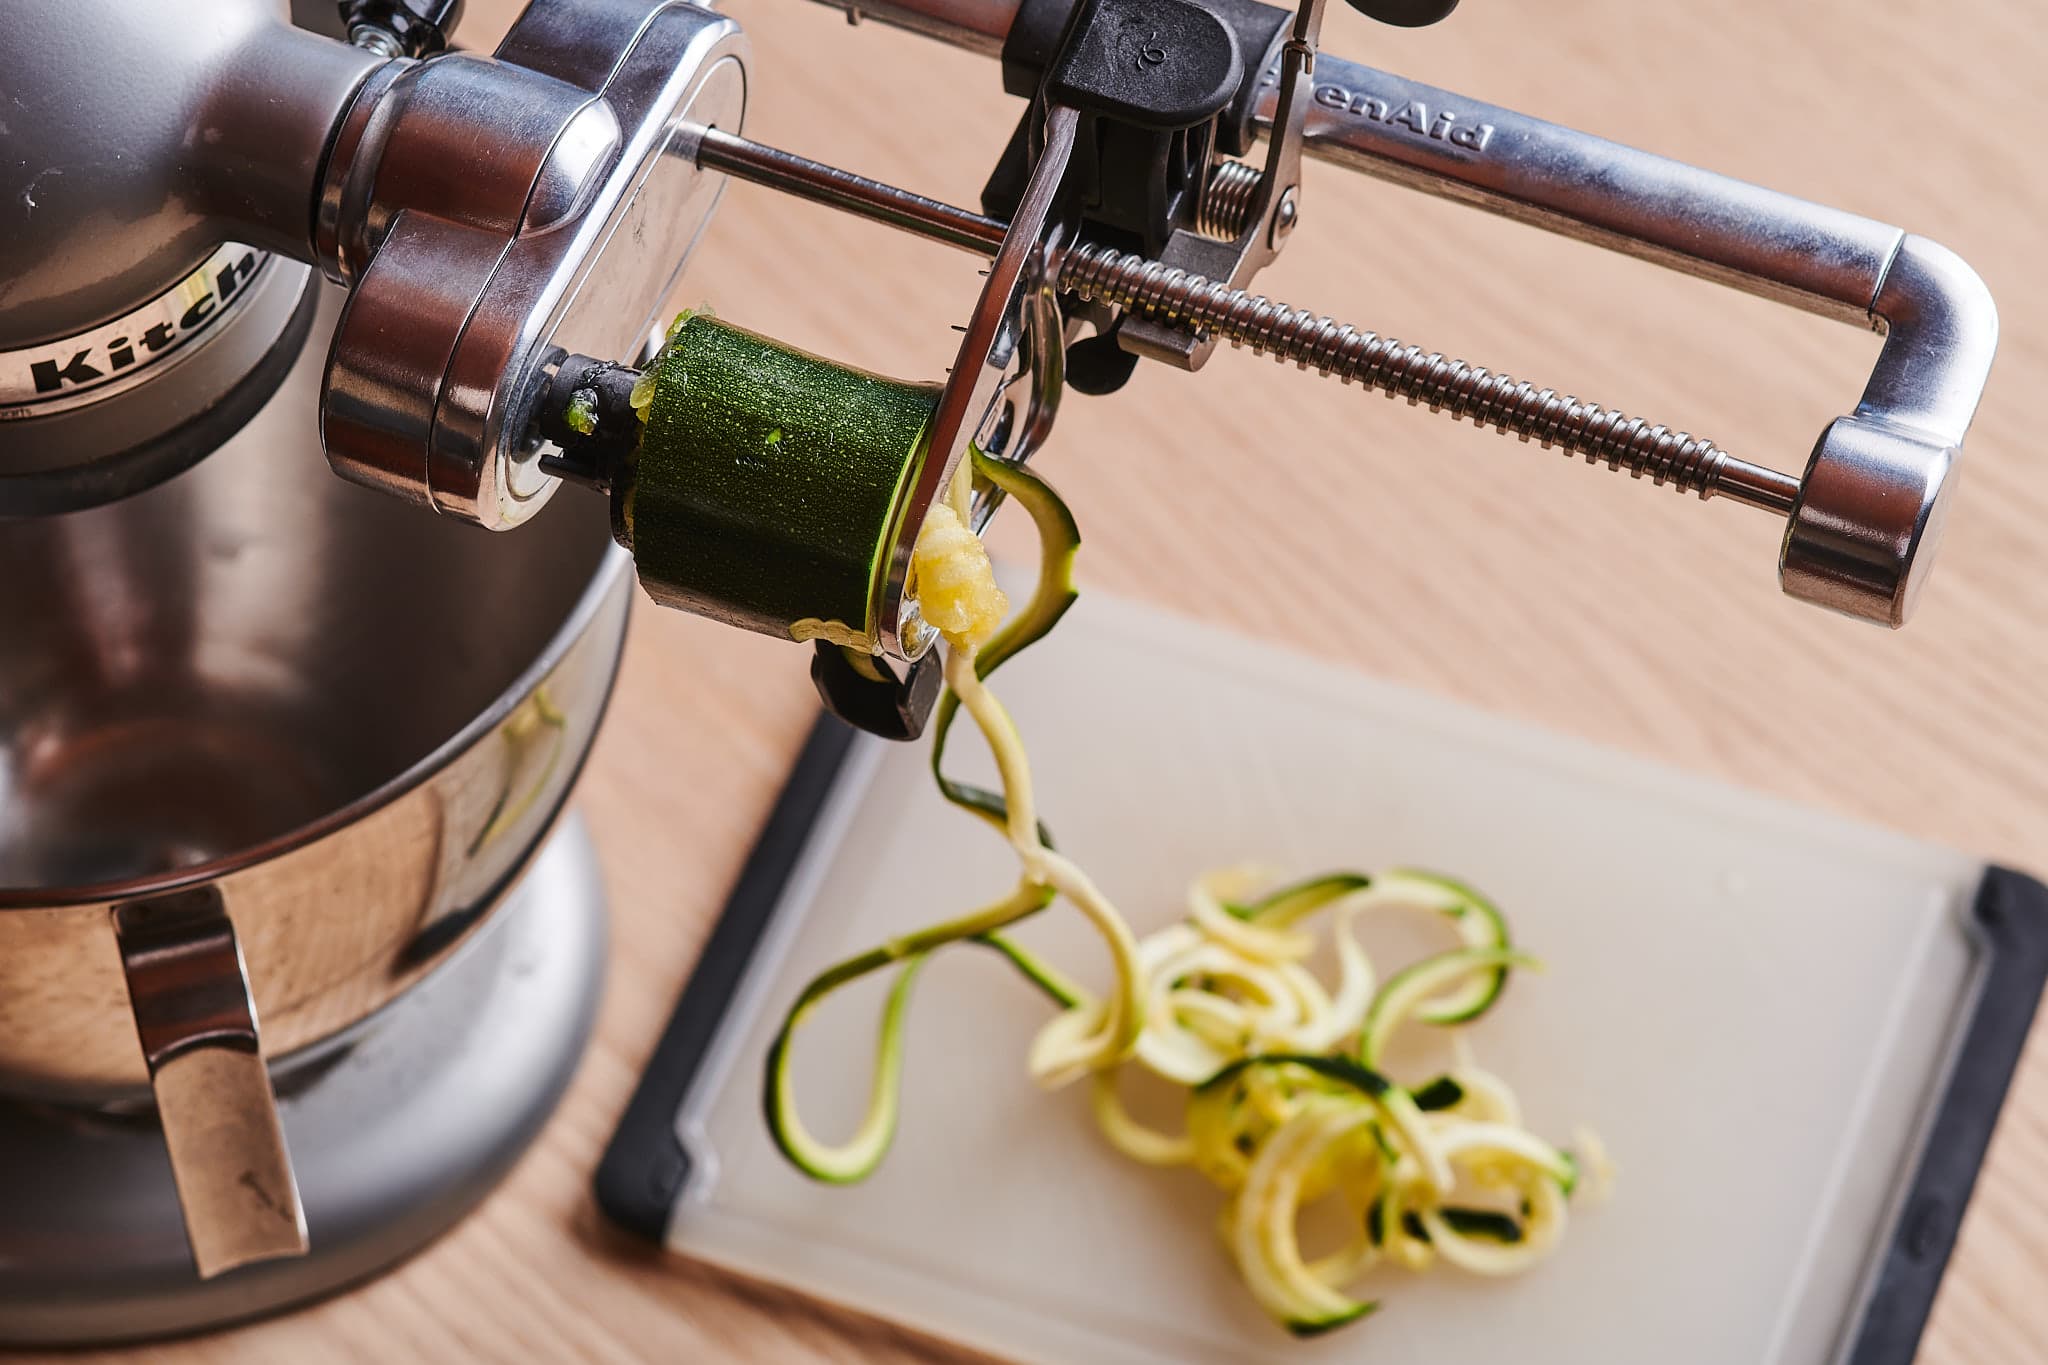 Do you really need a spiralizer in your kitchen to make zoodles? - Reviewed